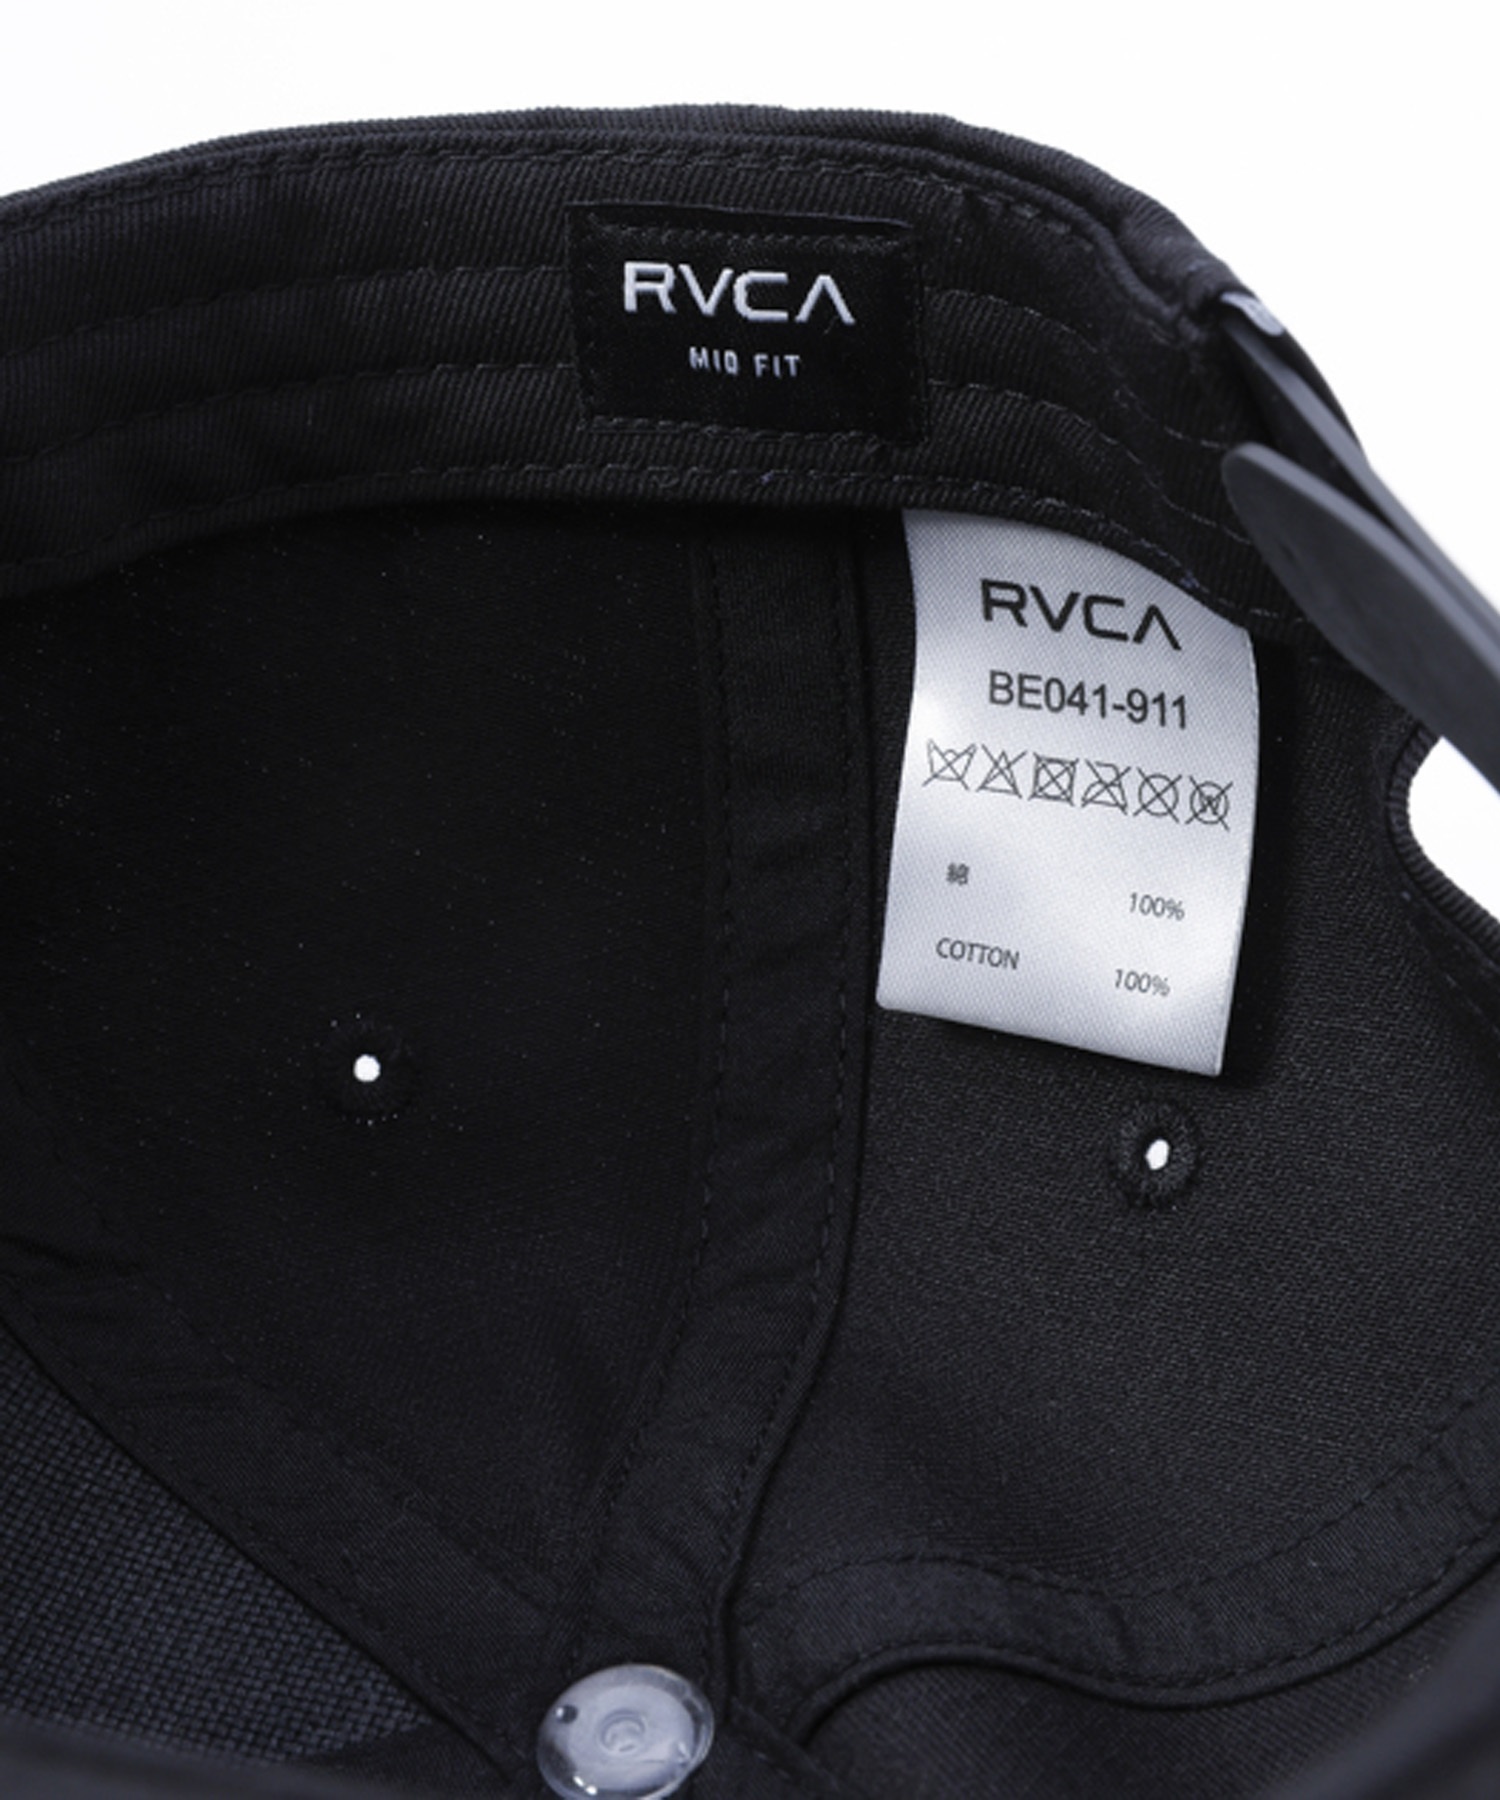 RVCA ルーカ キッズ キャップ  帽子 ロゴ 刺繍 サイズ調整可能 BE045-911(CKH-FREE)